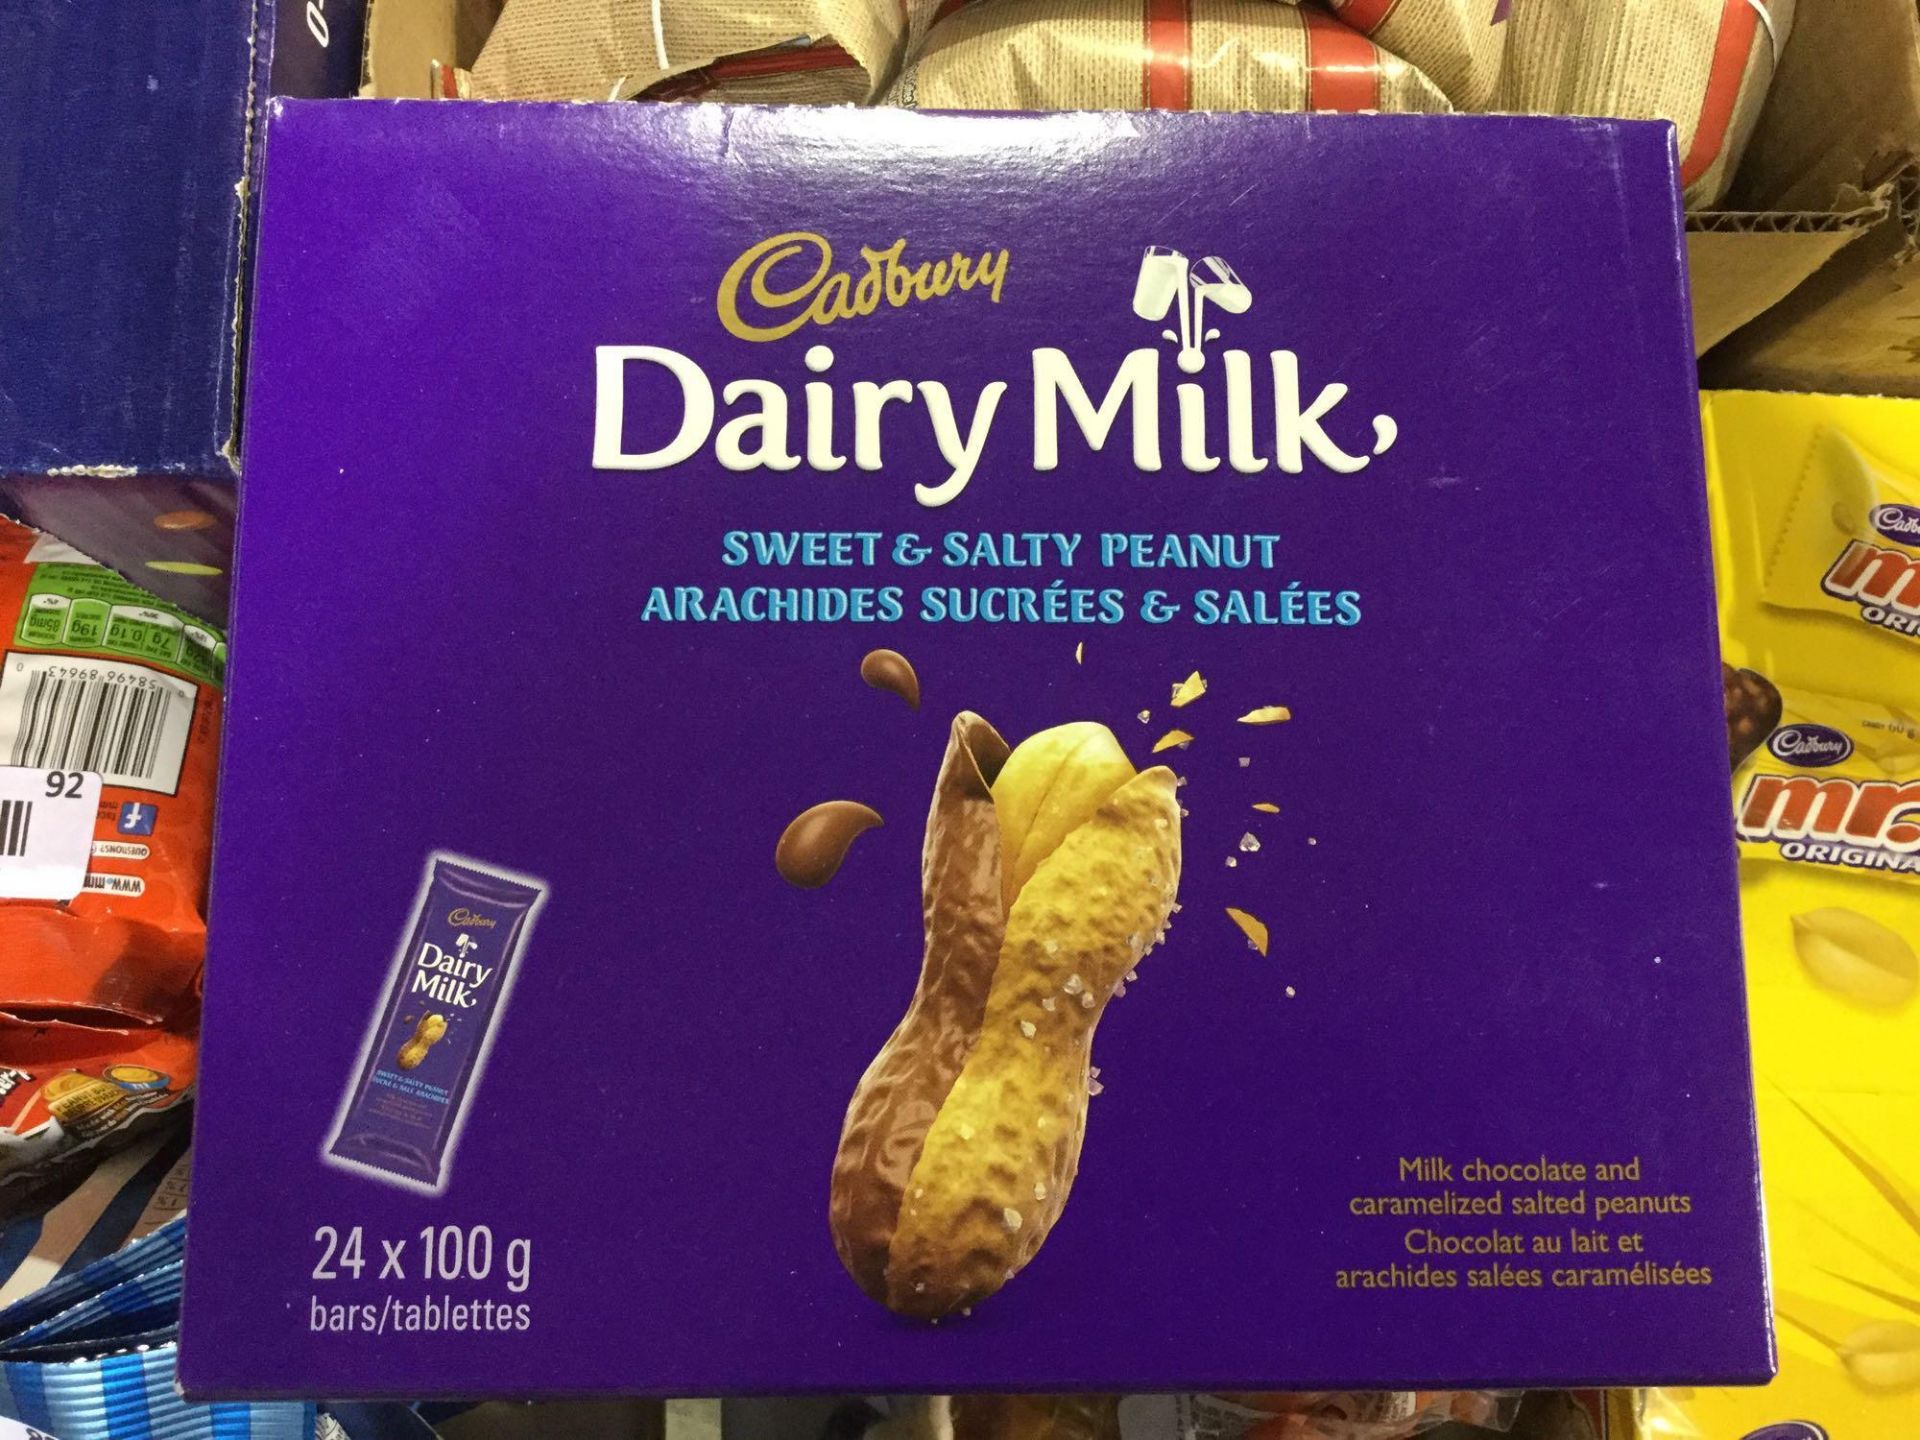 Case of 24 x 100 g Dairy Milk - Sweet and Salty Peanut Bars